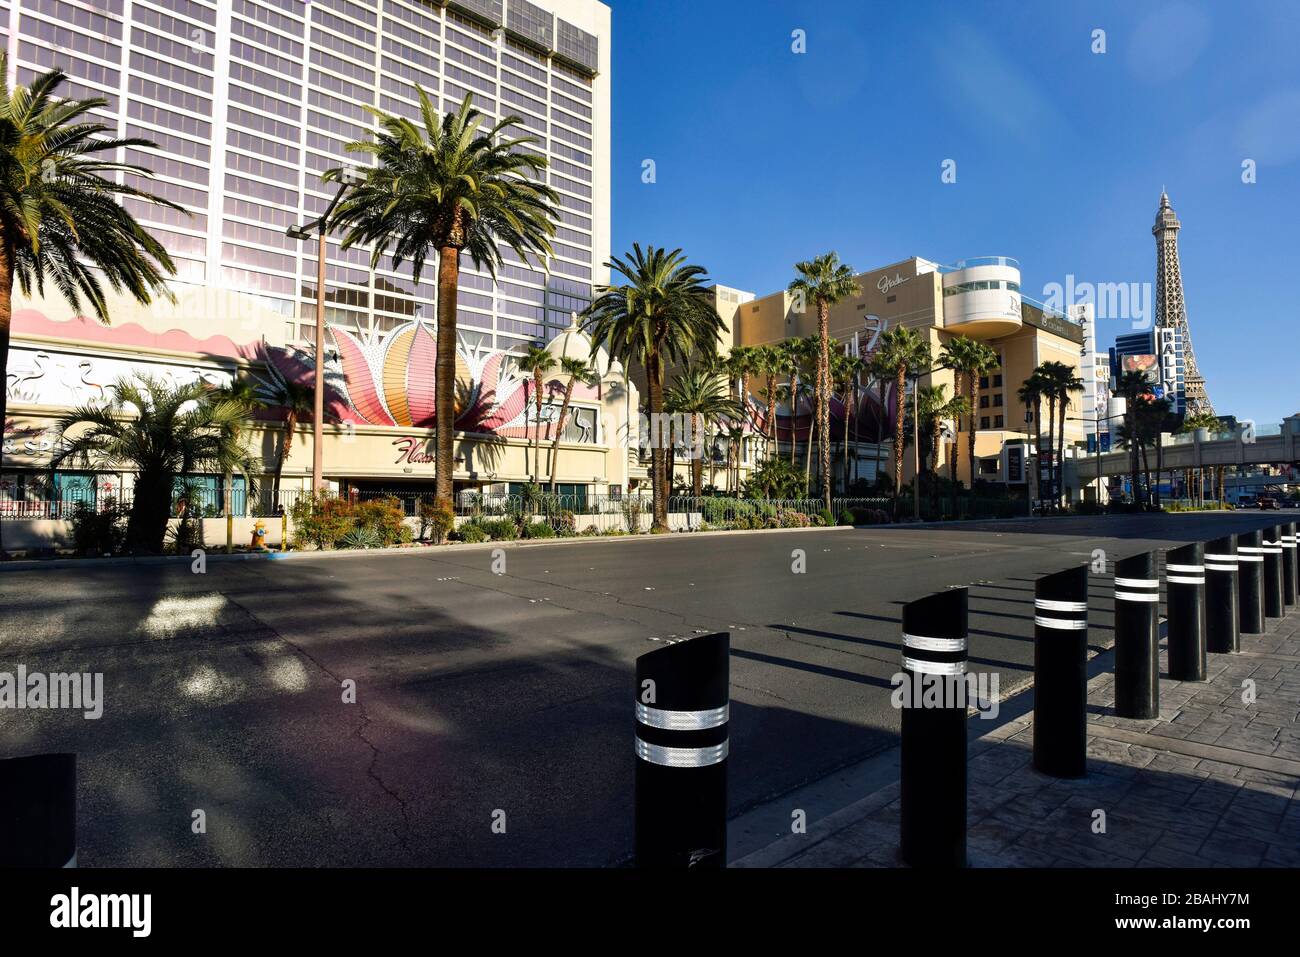 One week into the Las Vegas shut down due to Coronavirus, the Strip is fairly empty. Most residents seem to be heeding Governor Sisolak’s request you “Stay home for Nevada” with evidence of throughout Clark County, NV. The Empty Streets of Las Vegas Near The Flamingo Casino and Resort on Las Vegas Blvd. Photo Credit: Ken Howard/Alamy Stock Photo